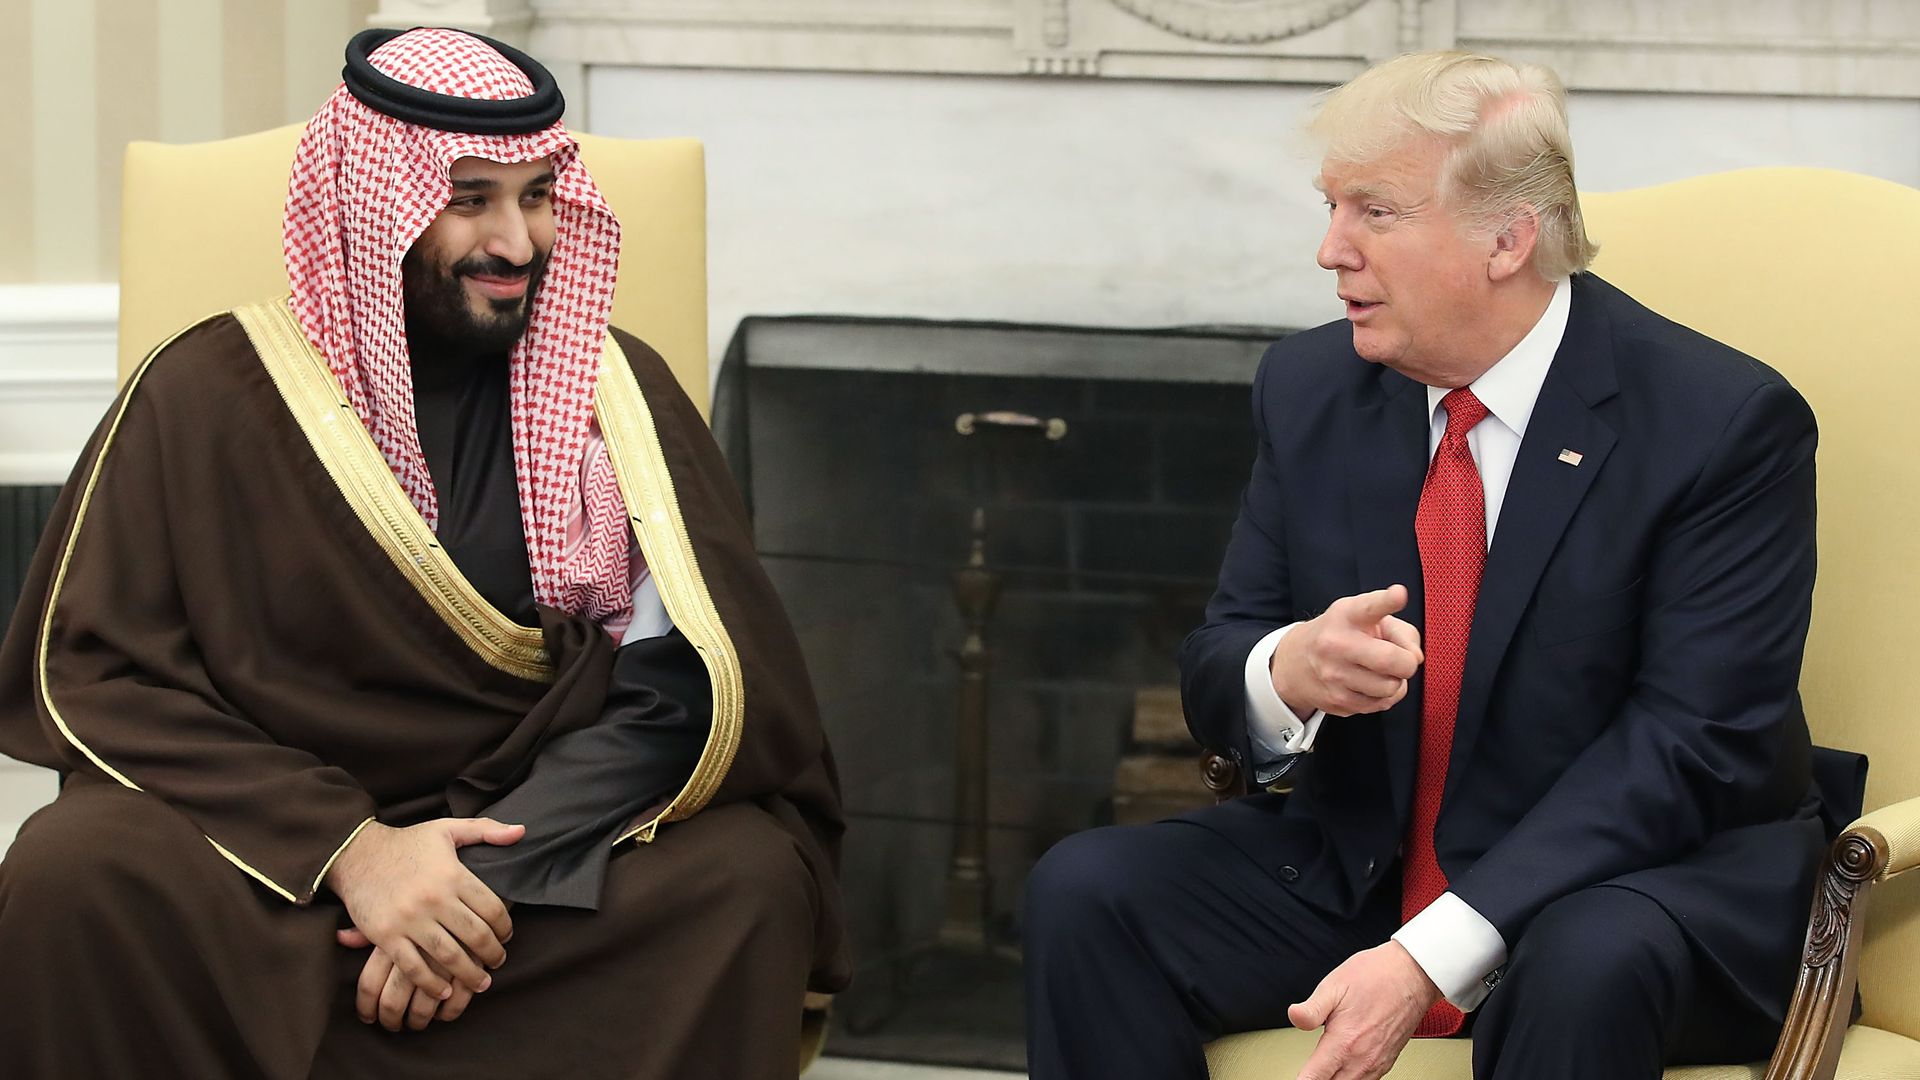 President Trump and Saudi Crown Prince Mohammed Bin Salman seated next to each other in Oval Office